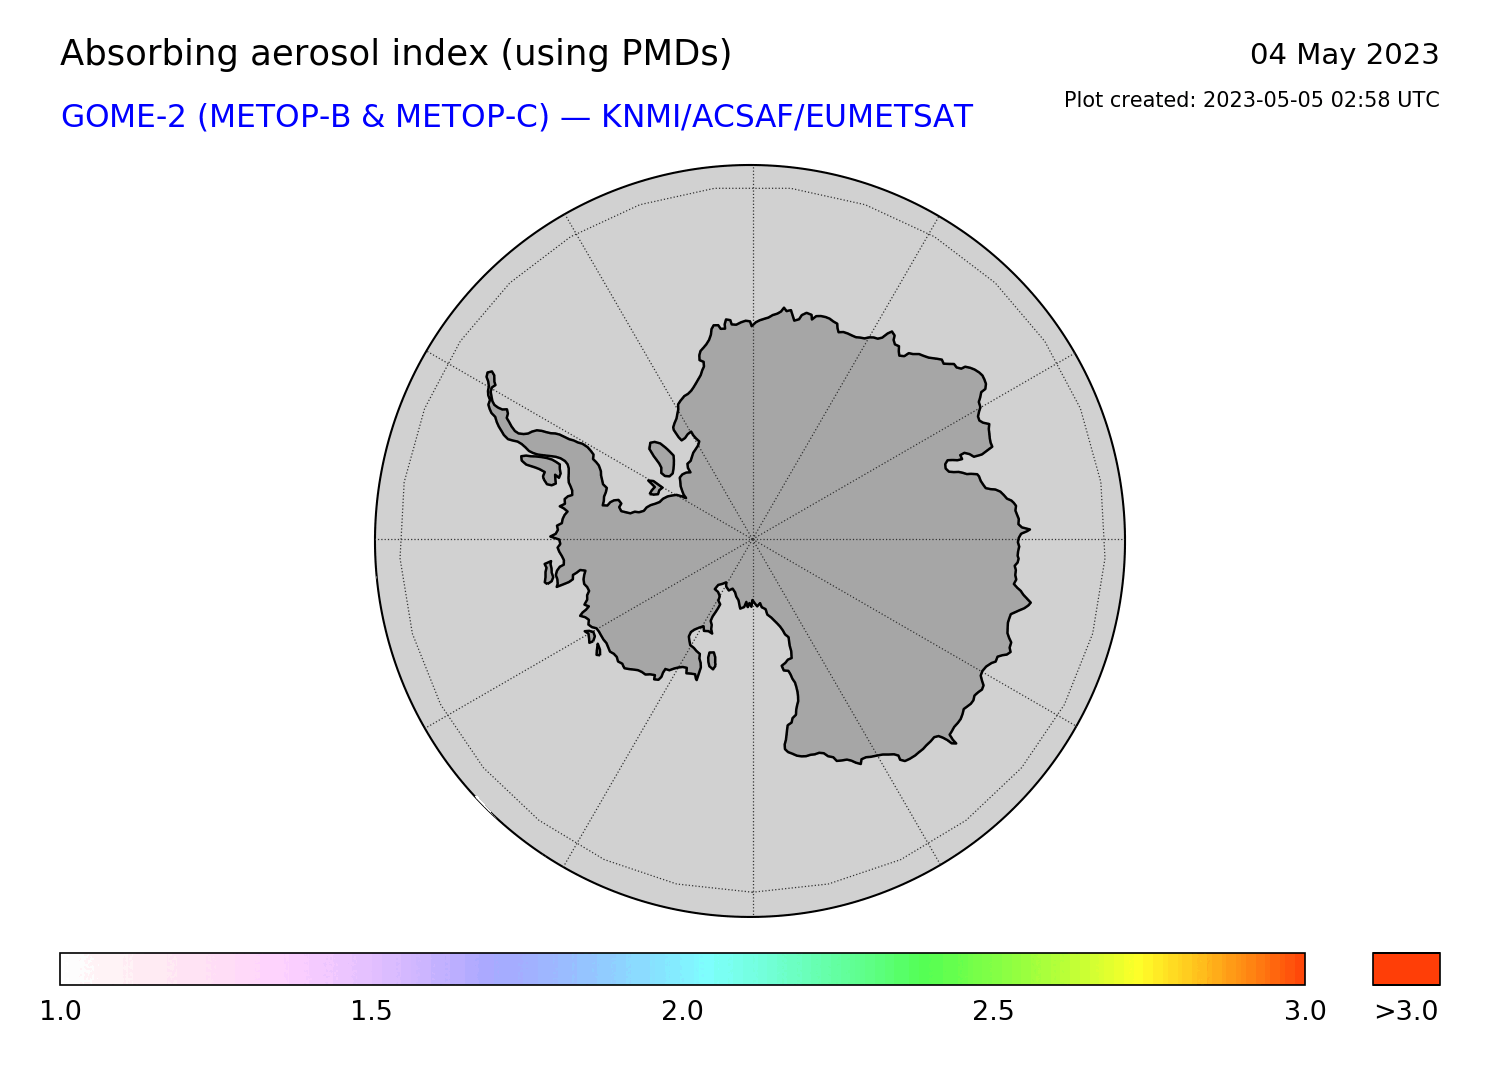 GOME-2 - Absorbing aerosol index of 04 May 2023